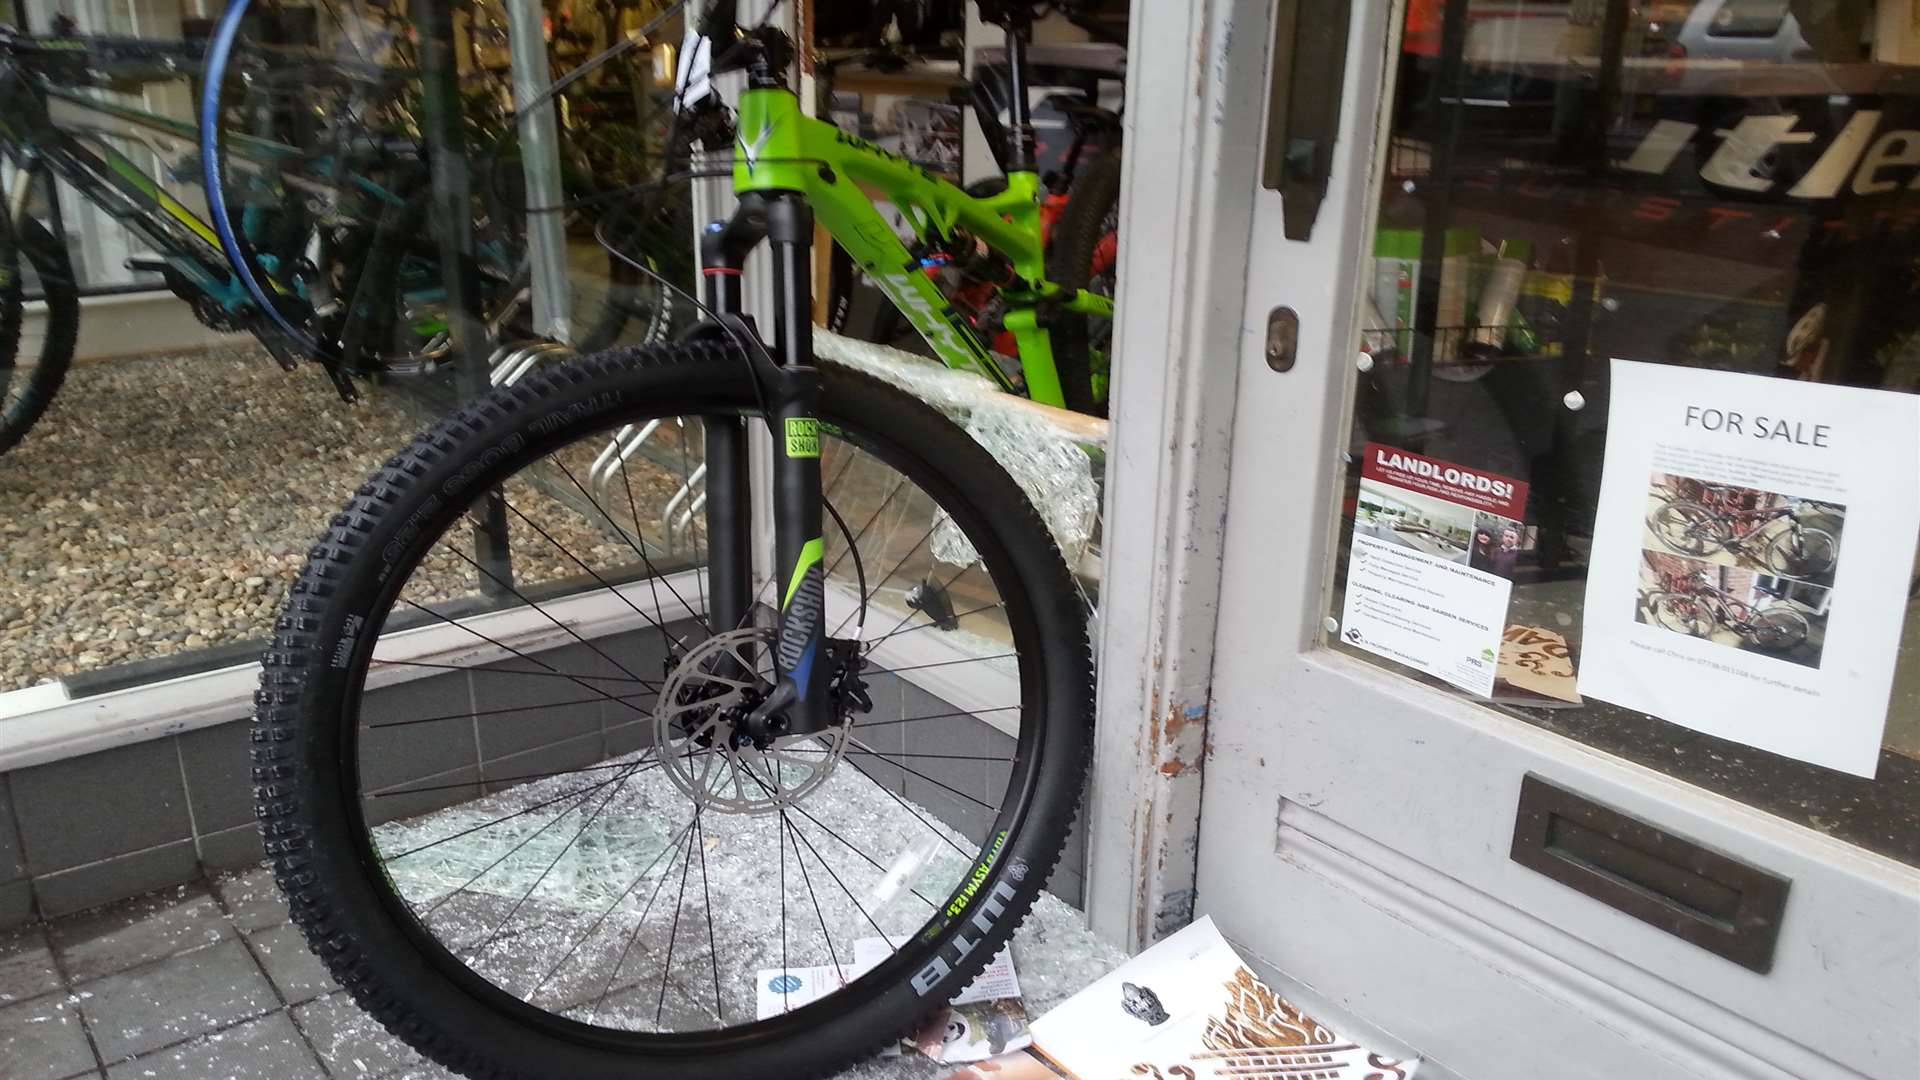 A mountain bike worth more than £2,000 was left